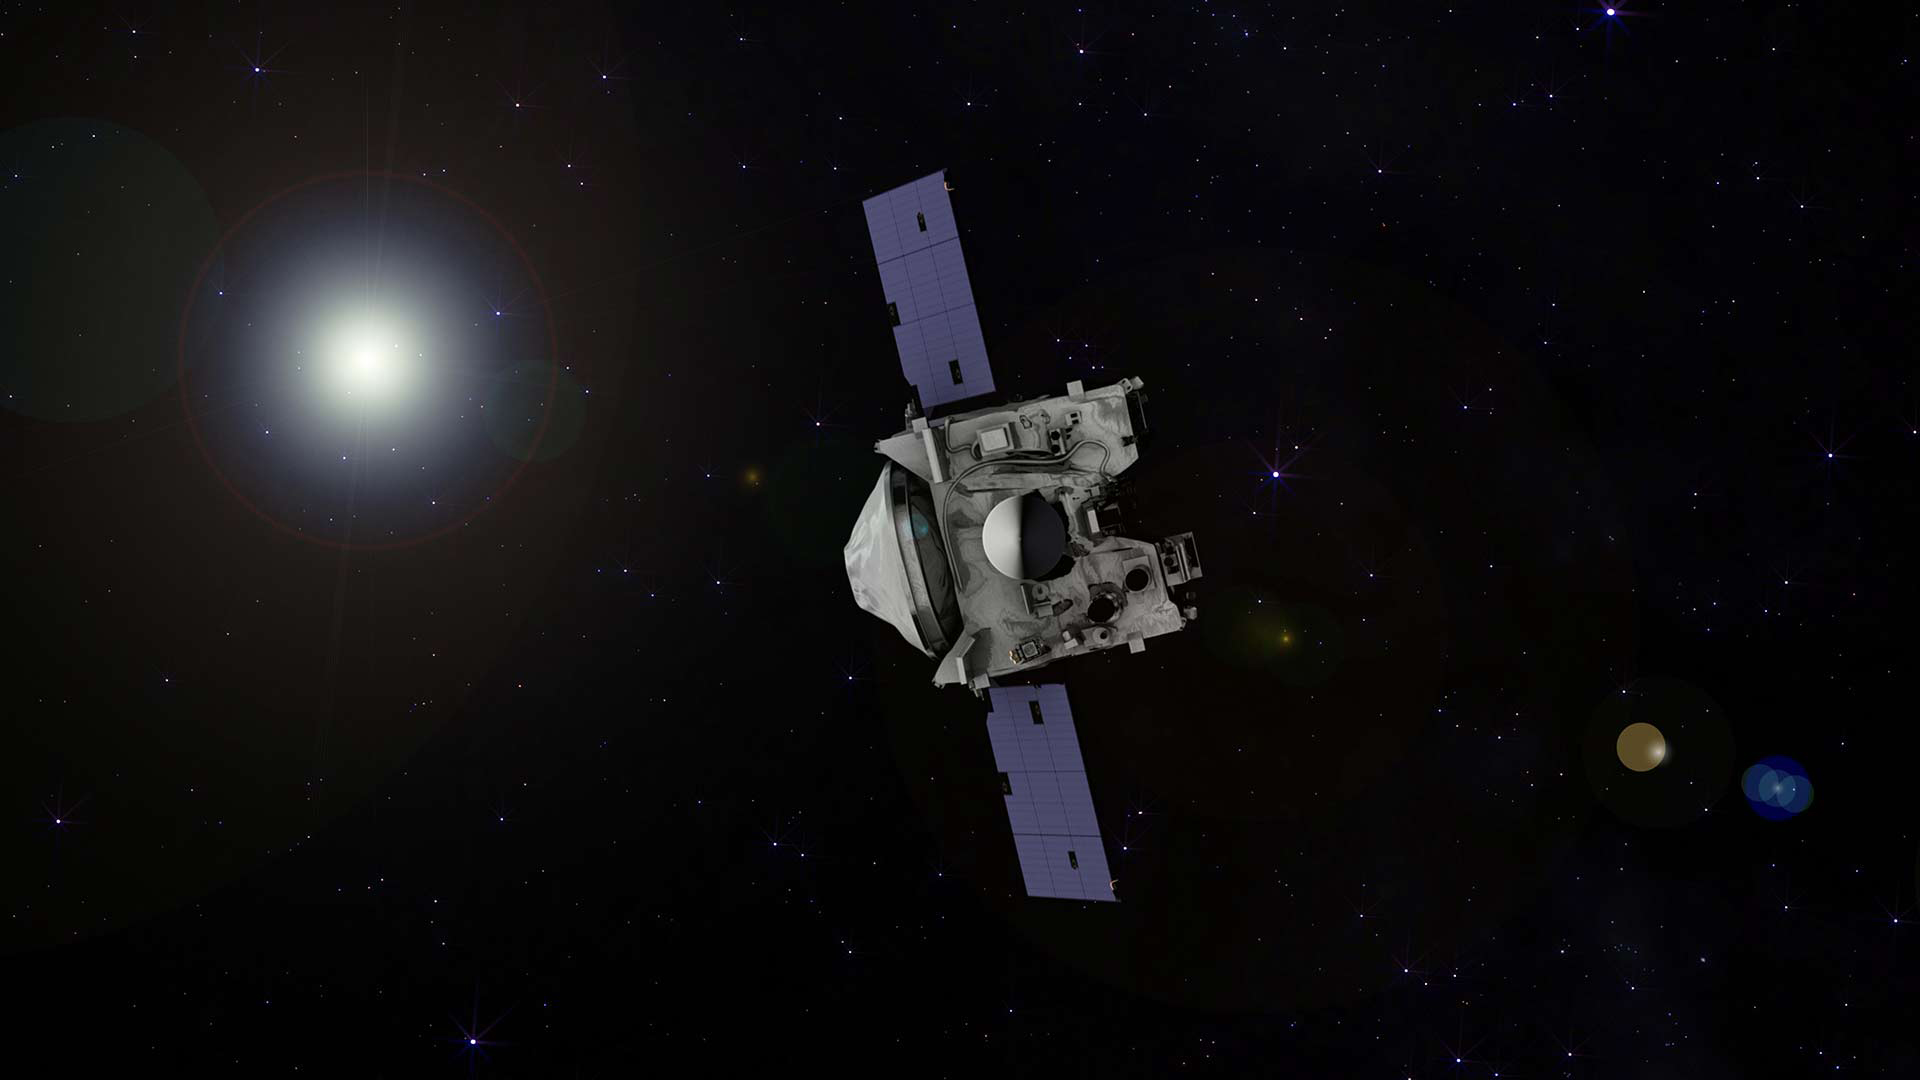 OSIRIS-REx completes a 26-month journey to the asteroid Bennu on Monday. 